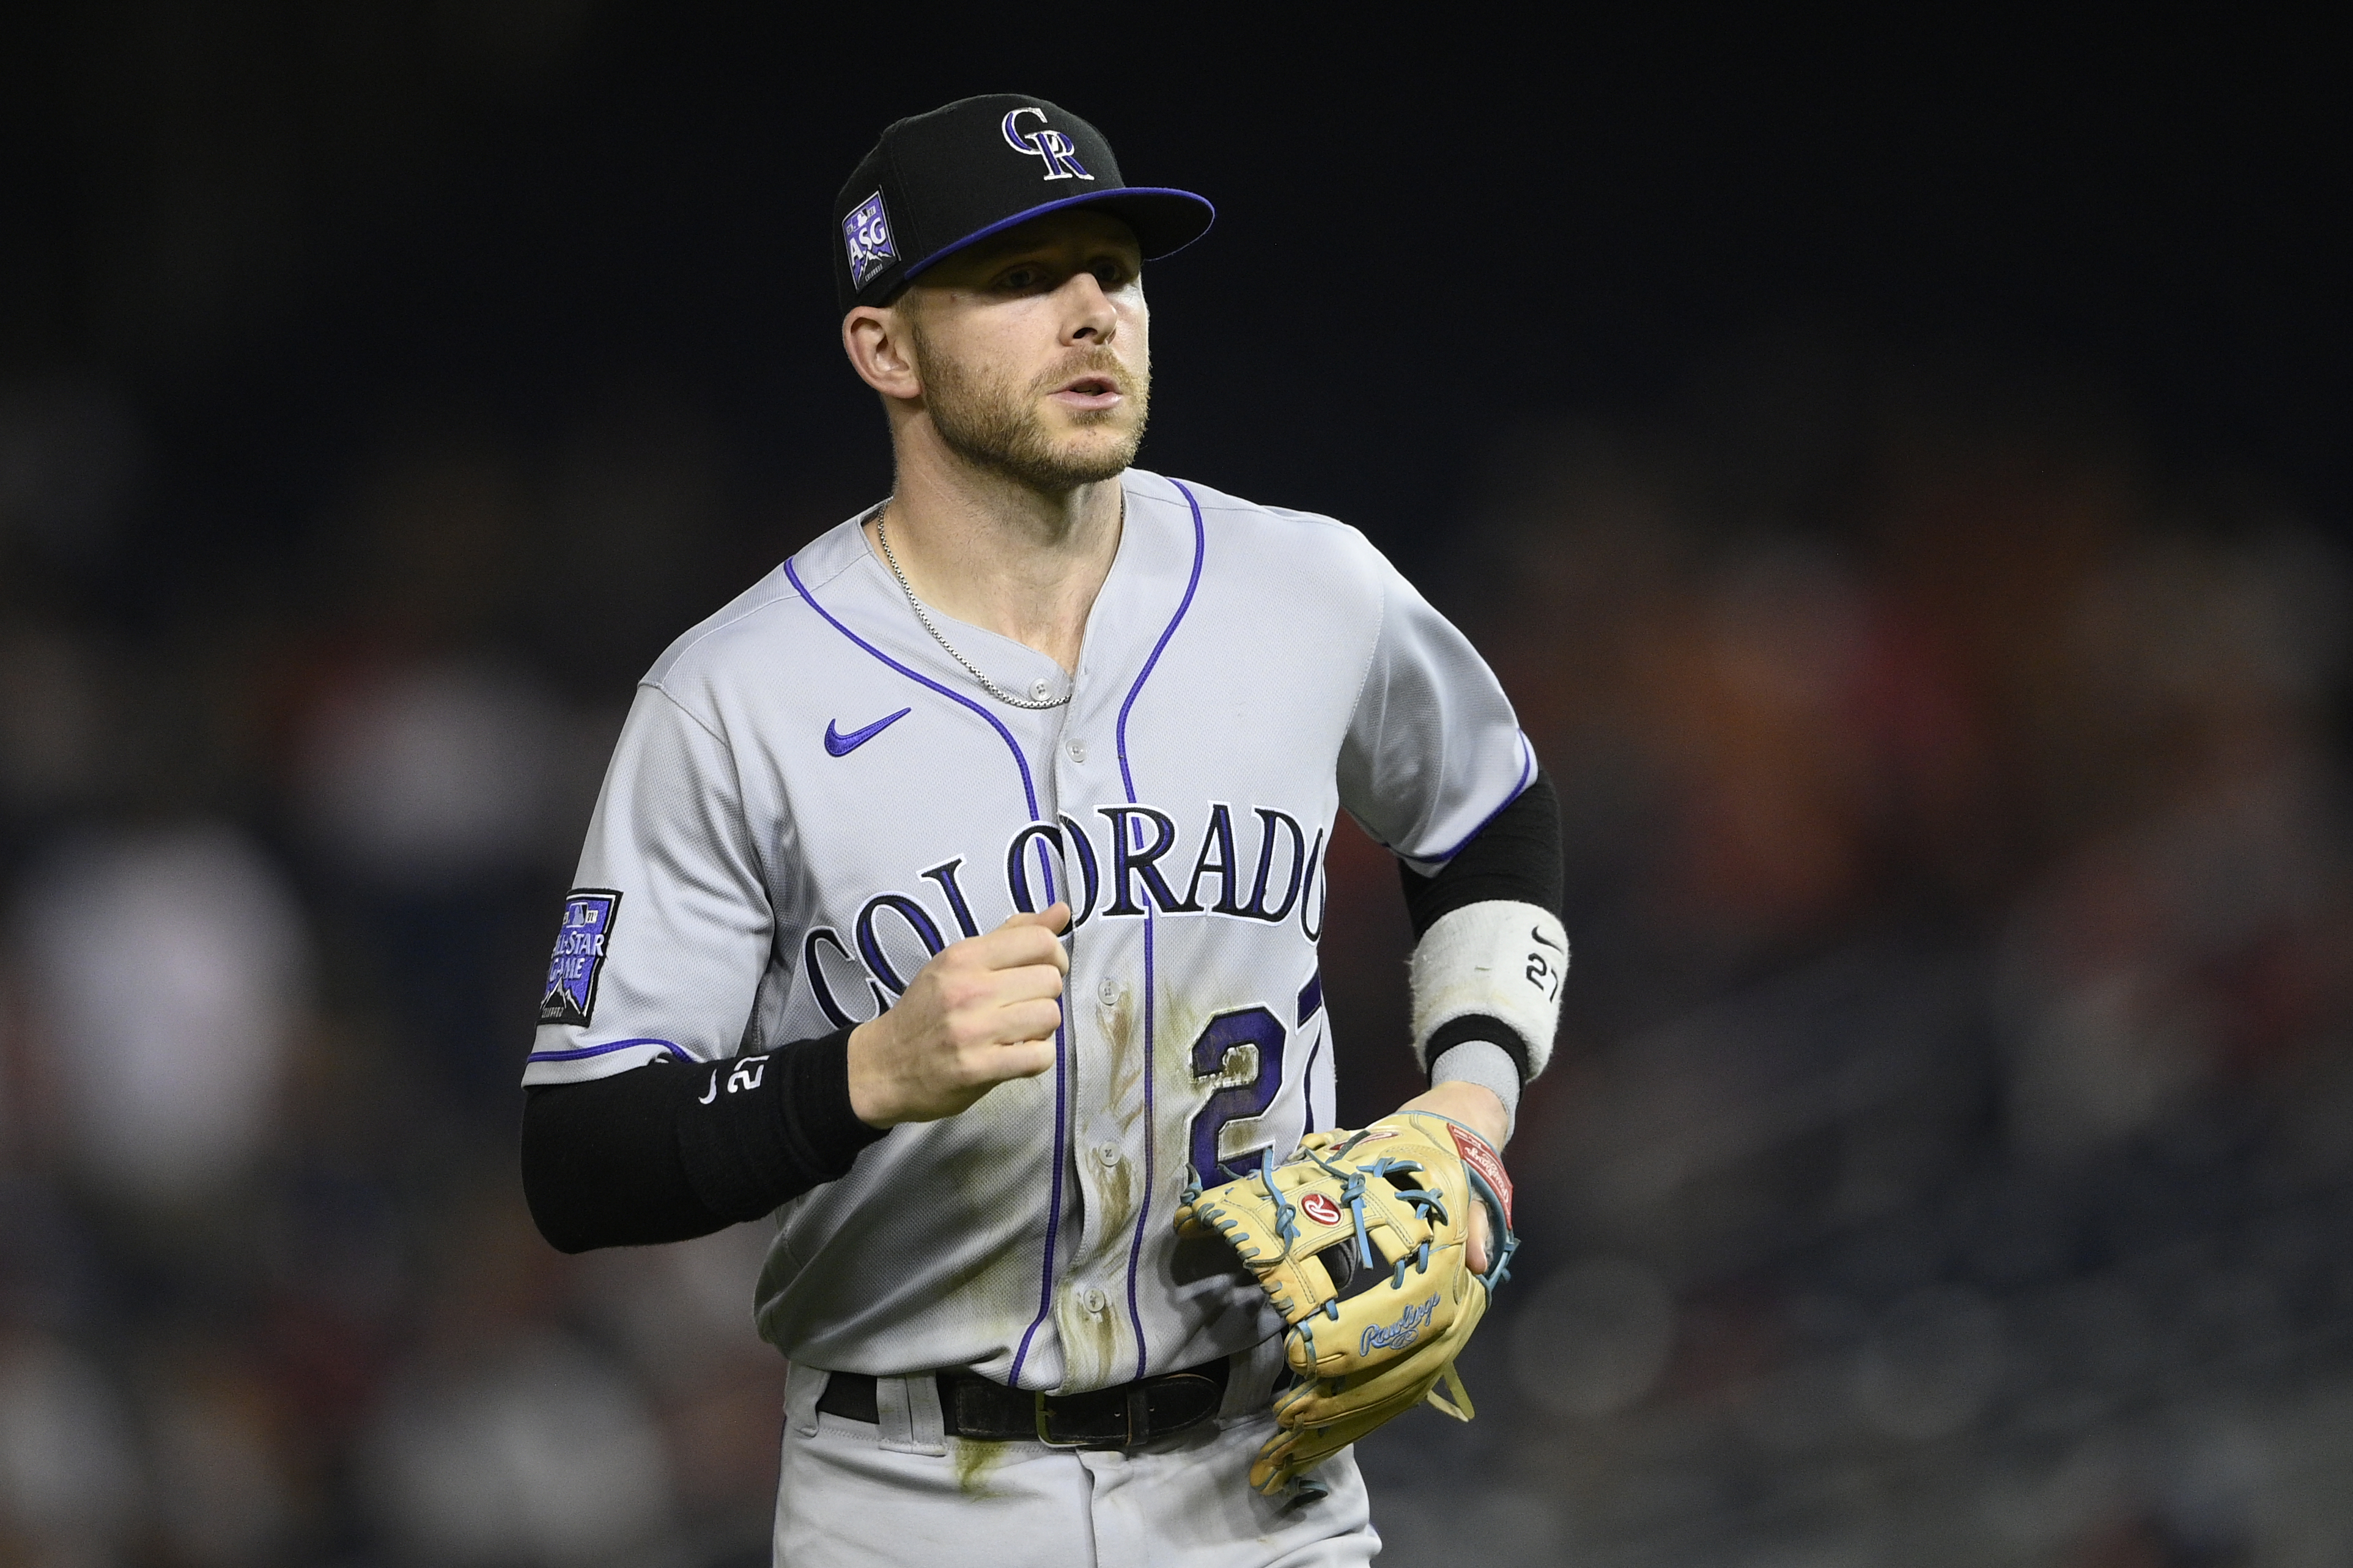 Reports: Red Sox sign Rockies SS Trevor Story to play 2B